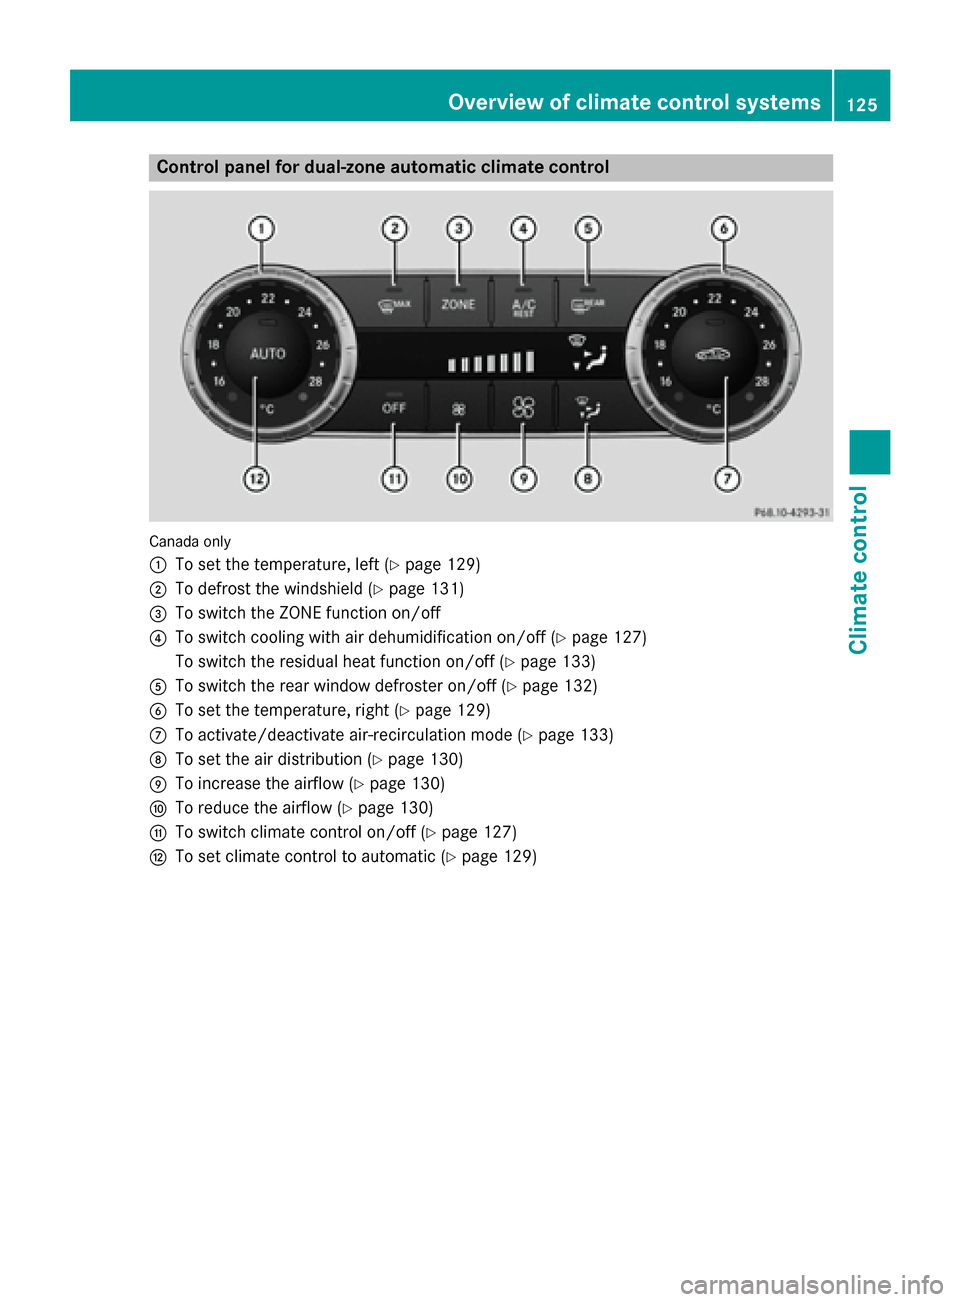 MERCEDES-BENZ SLK-Class 2015 R172 Owners Manual Control panel for dual-zone automatic climate control
Canada only
0043
To set the temperature, left (Y page 129)
0044 To defrost the windshield (Y page 131)
0087 To switch the ZONE function on/off
008